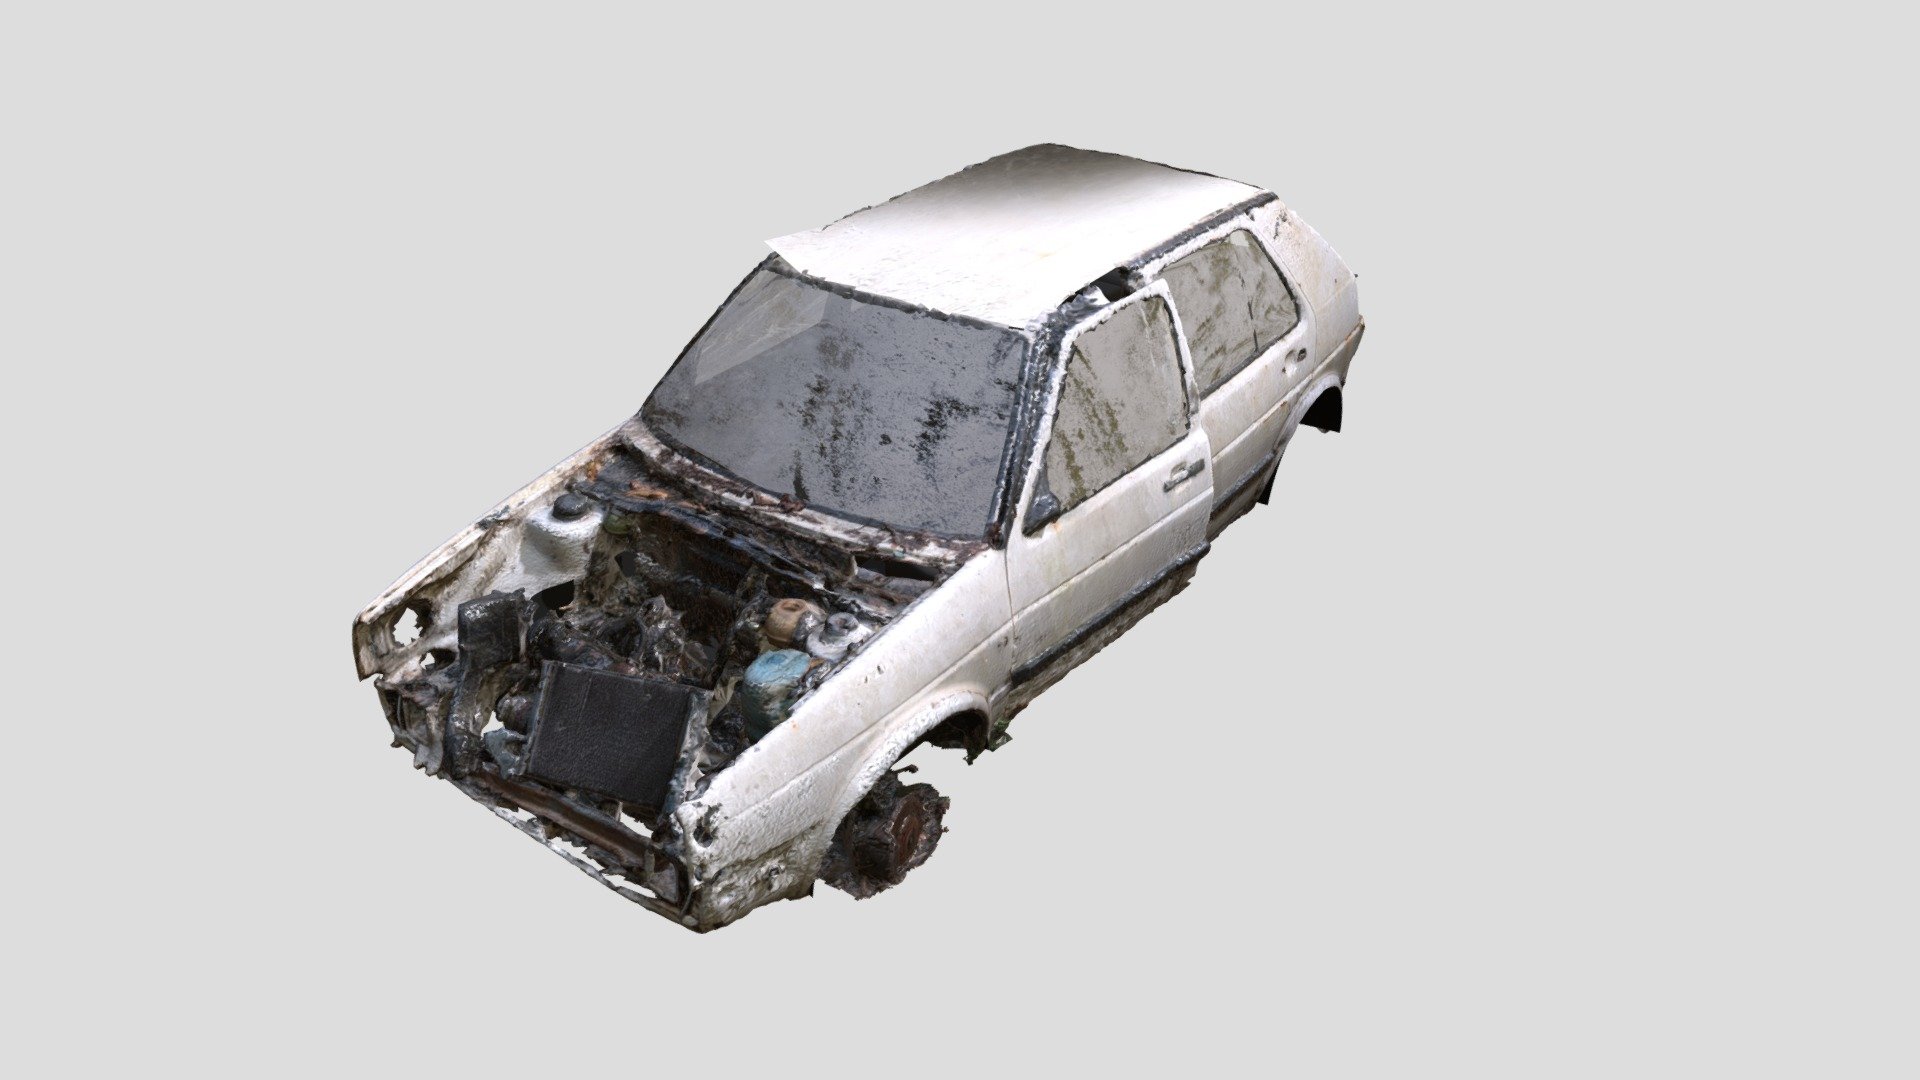 Photogrammetry base with some very simple modeling (seats, windows). Not very clean, nice for background. 

Made with meshroom and blender.

Enjoy ! - Wrecked car 1_VHU - Download Free 3D model by Maxim.O 3d model